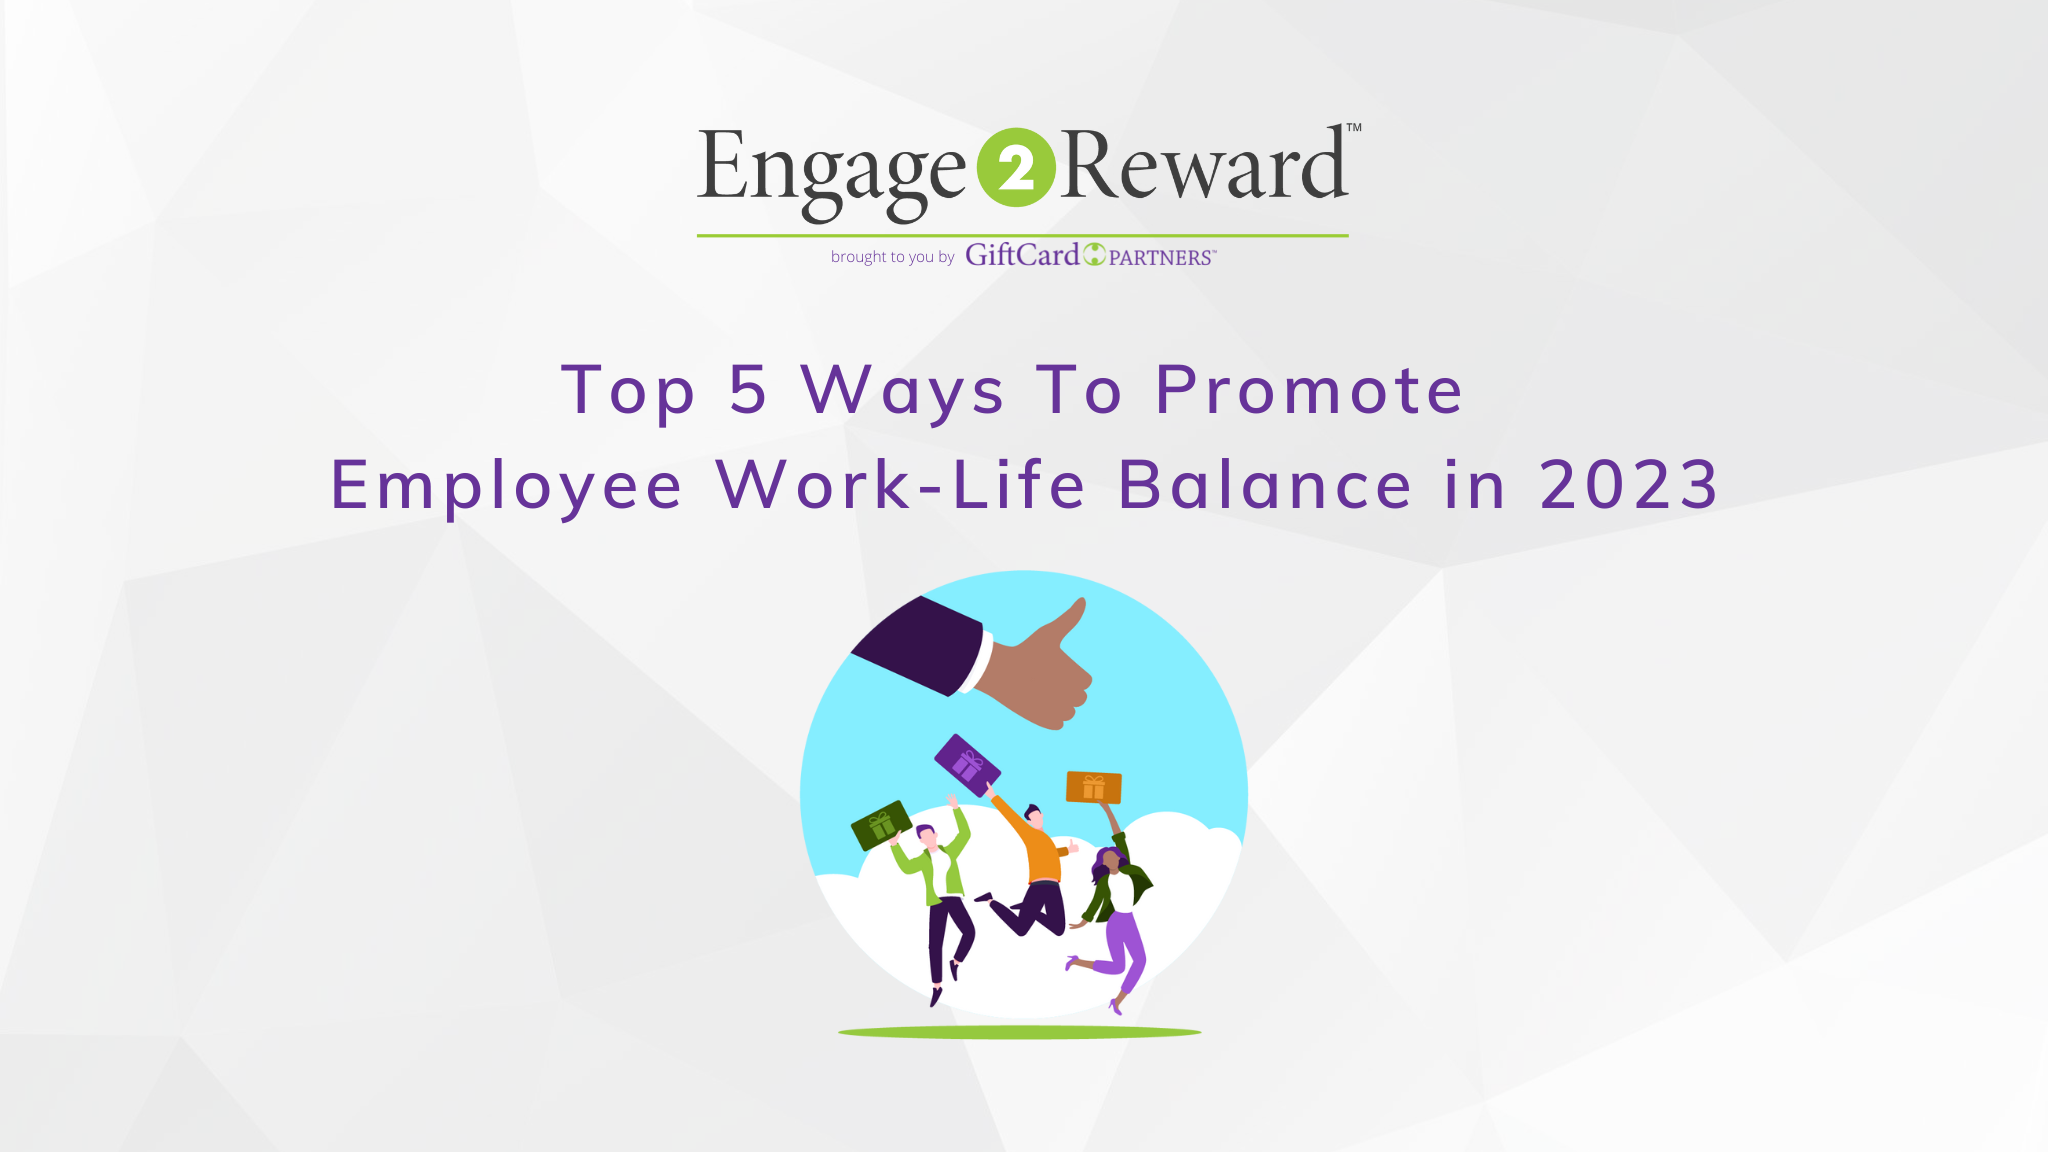 Top 5 Ways To Promote Employee Work-Life Balance in 2023